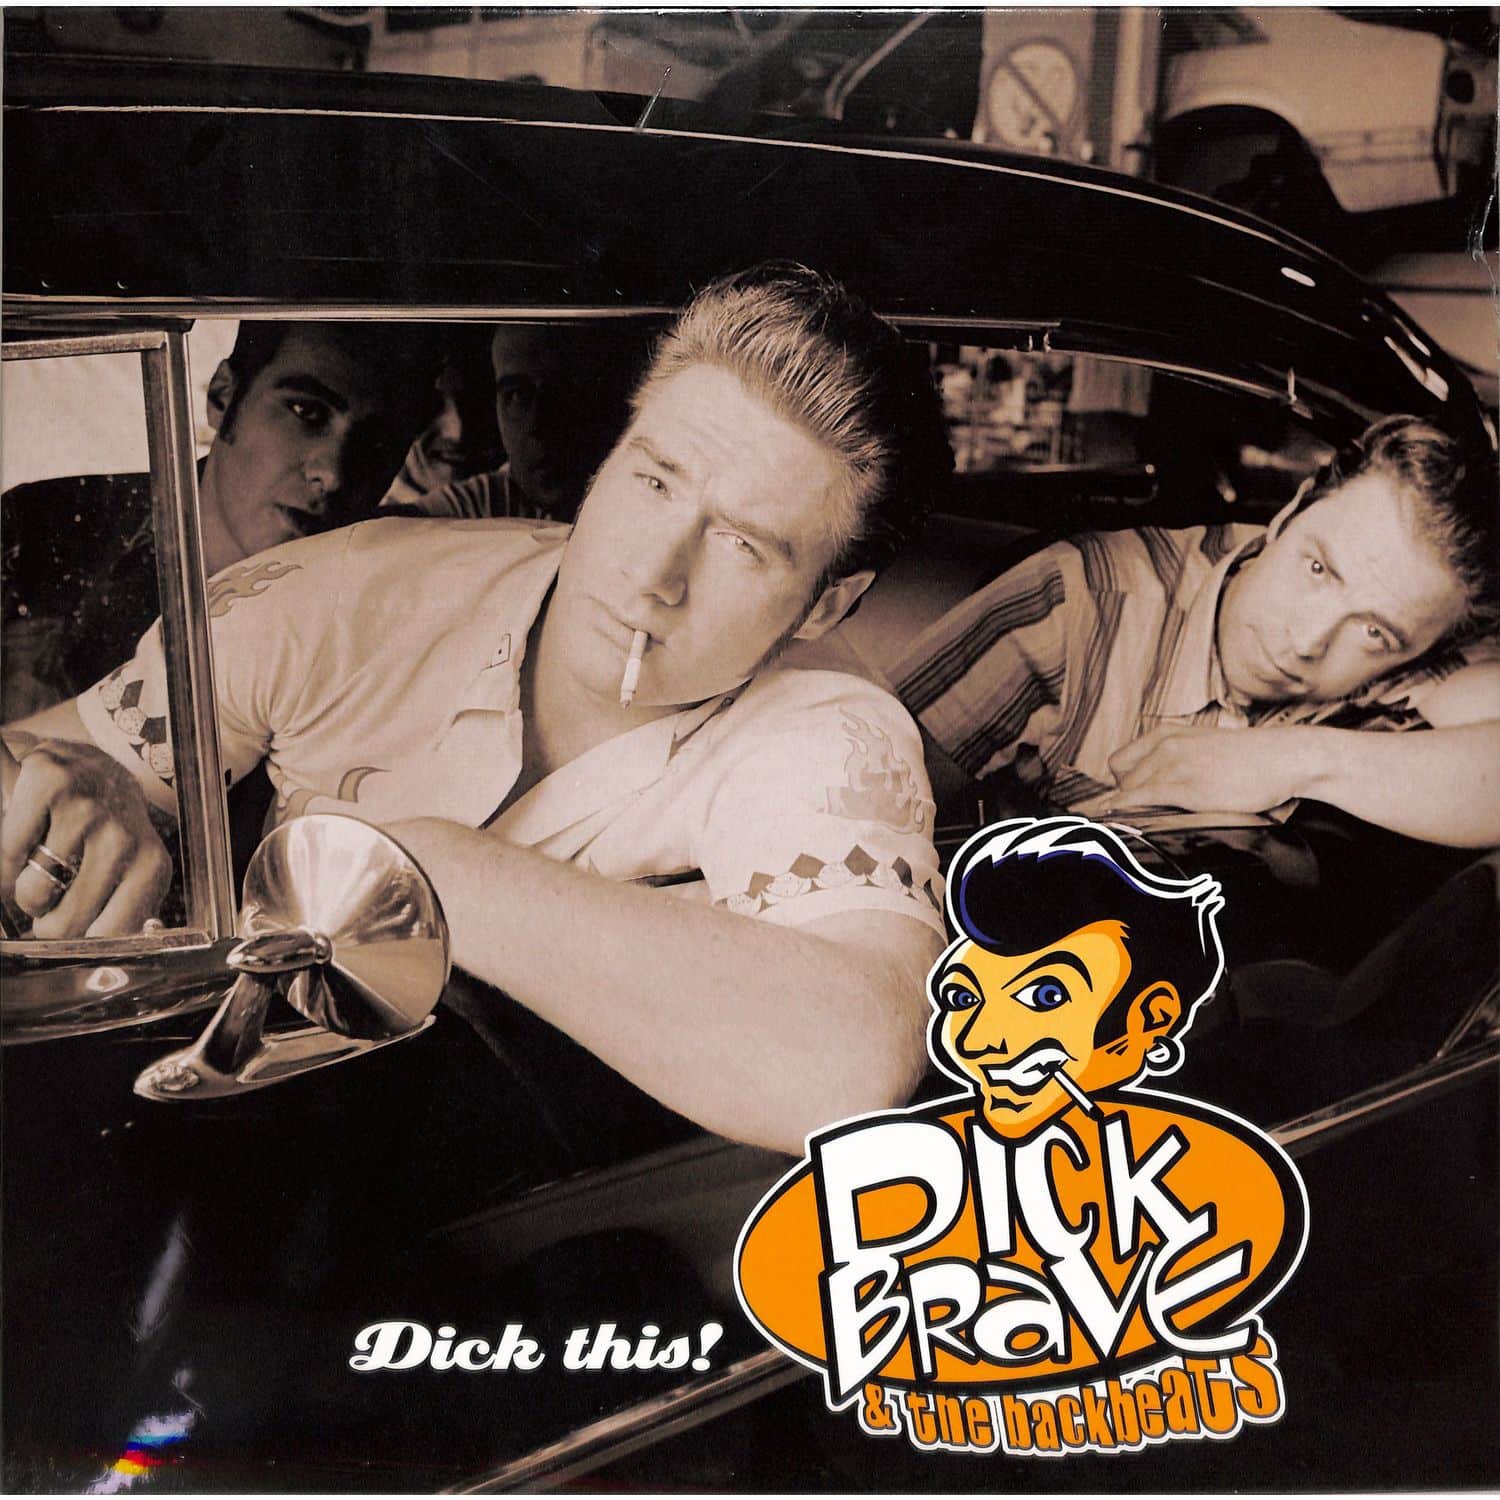 Dick Brave & The Backbeats - DICK THIS 